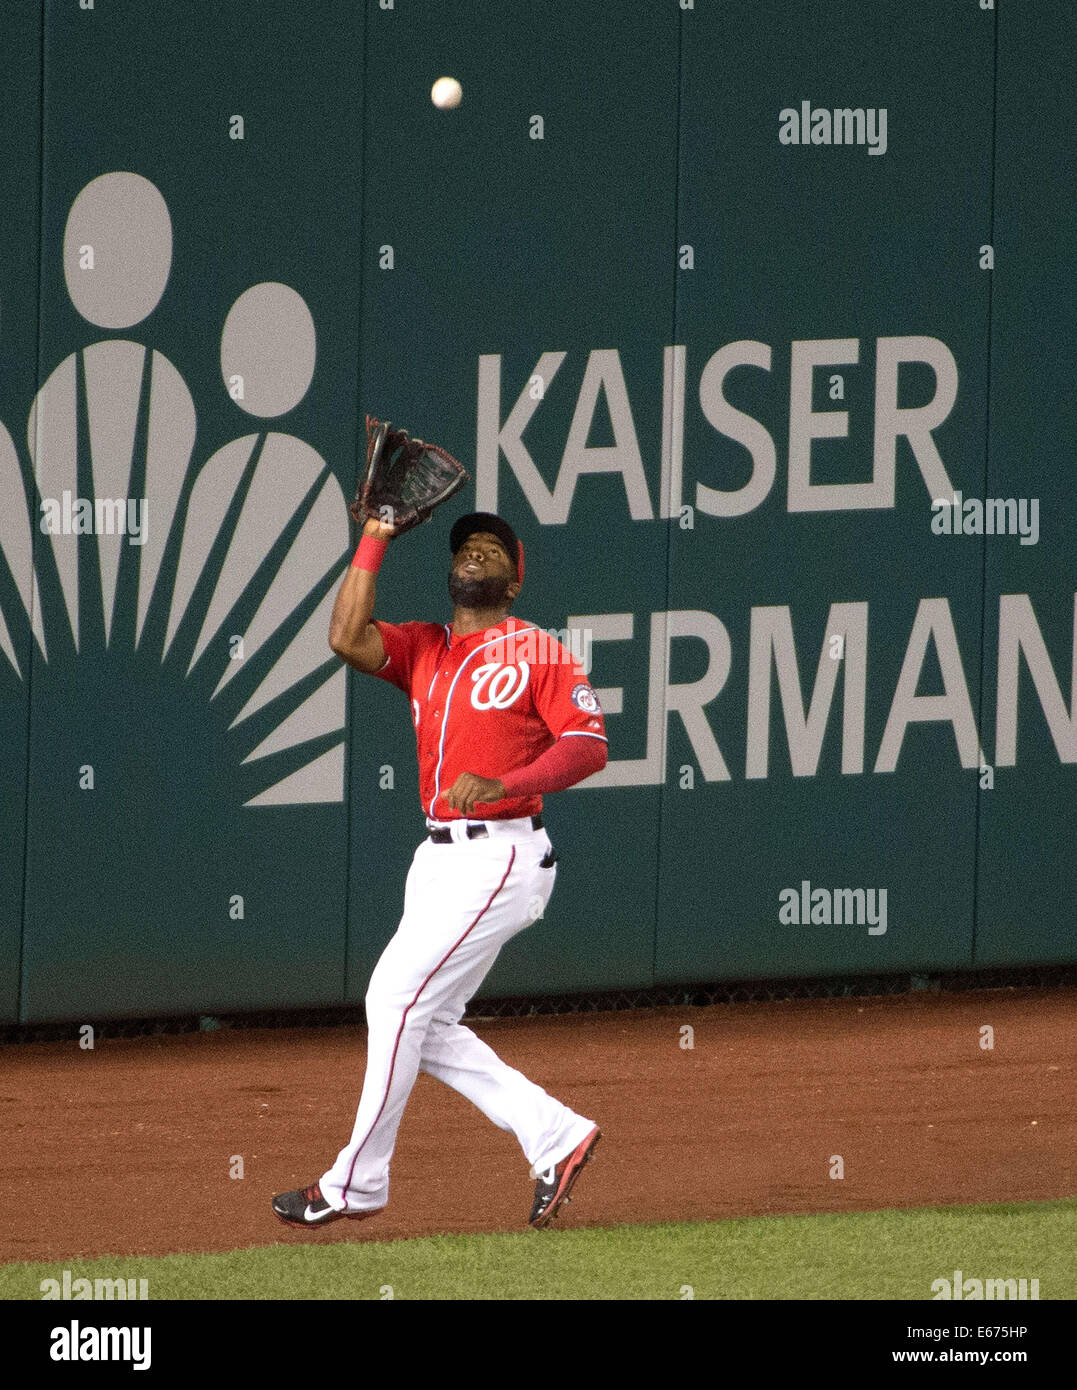 Washington, DC, USA. 16th Aug, 2014. Washington Nationals center fielder Denard Span (2) catches a fly ball on the warning track during the fifth inning of their game against the Pittsburgh Pirates at Nationals Park in Washington, D.C, Saturday, August 16, 2014. Credit:  Harry E. Walker/ZUMA Wire/Alamy Live News Stock Photo